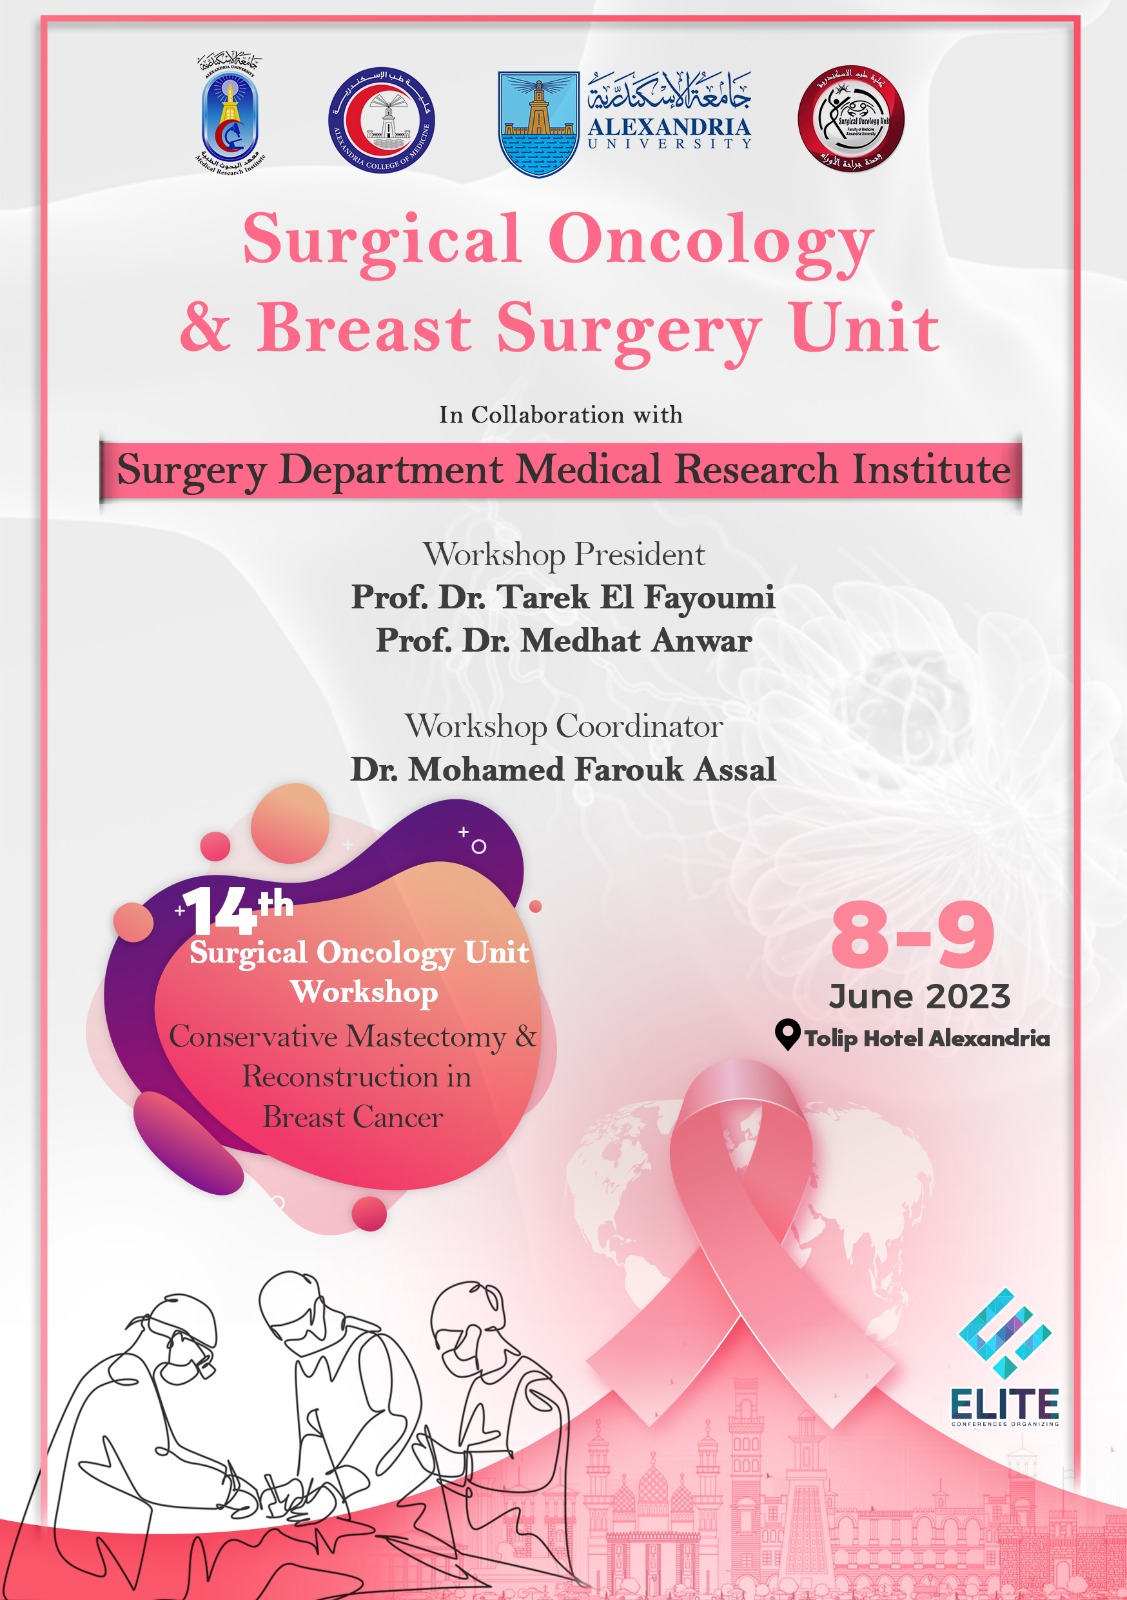 Surgical Oncology & Breast Surgery Unit